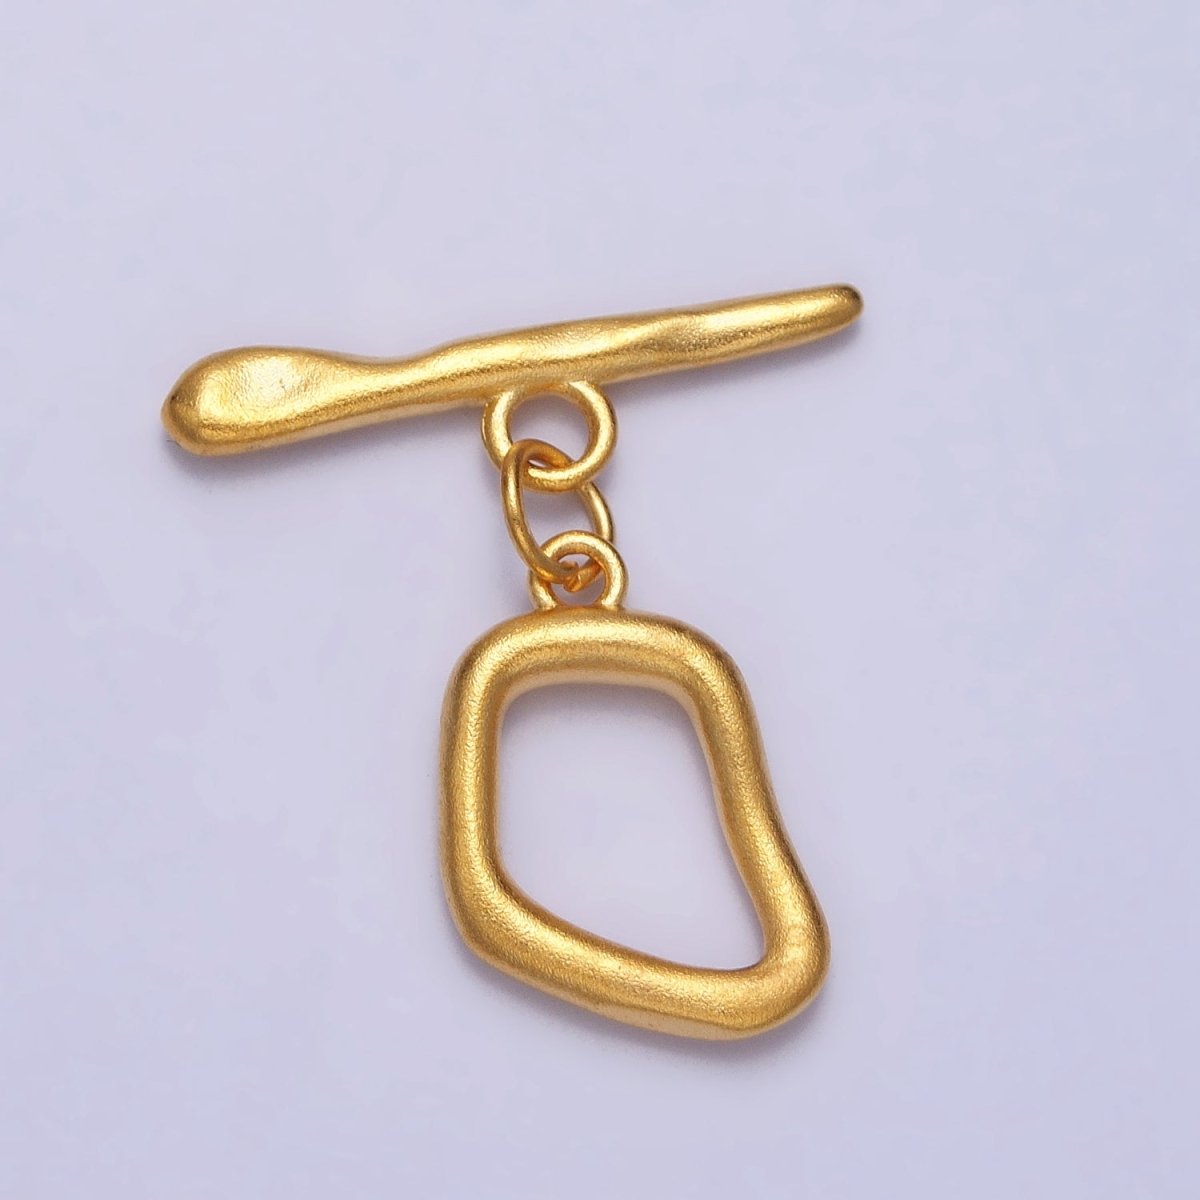 Hammered Geometric Toggle Clasps Jewelry Closure Supply in Matte, Silver, Gold | Z-088 Z-089 Z--097 - DLUXCA